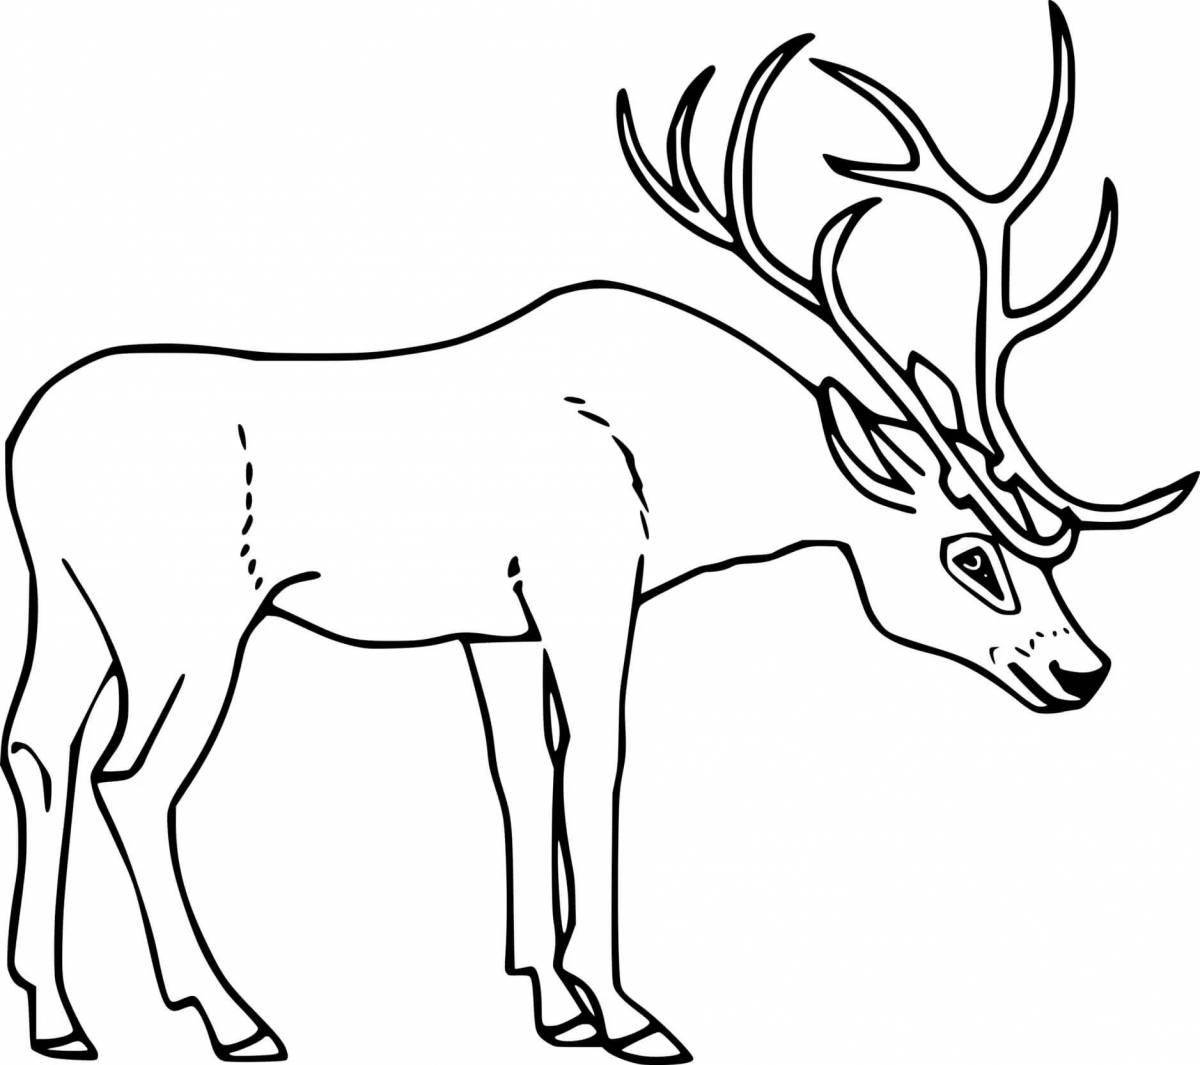 Dazzling northern animals coloring pages for kids